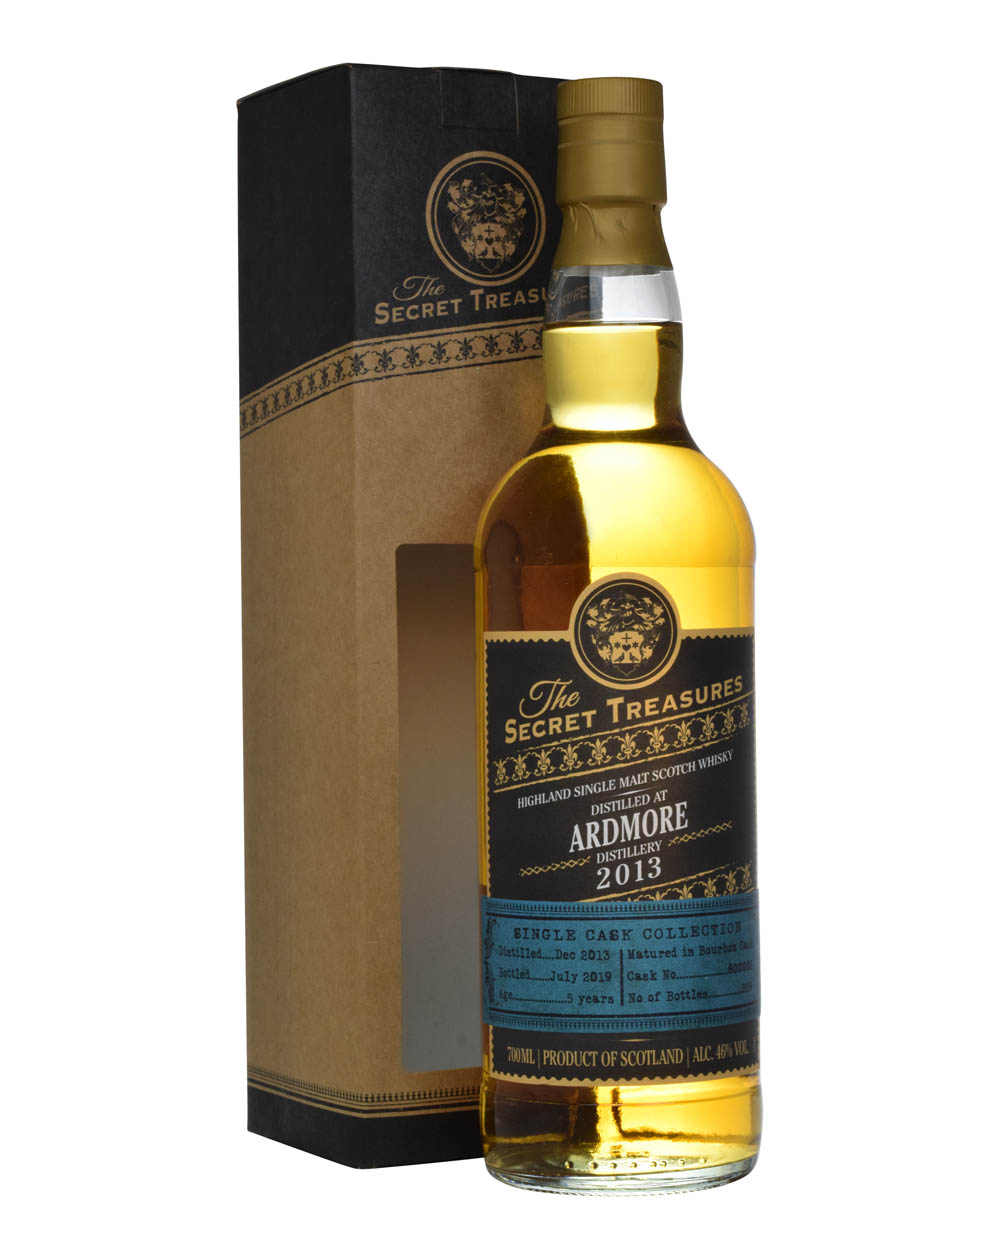 Ardmore 5 Years Old Secrret Treasures 2013 Box Musthave Malts MHM